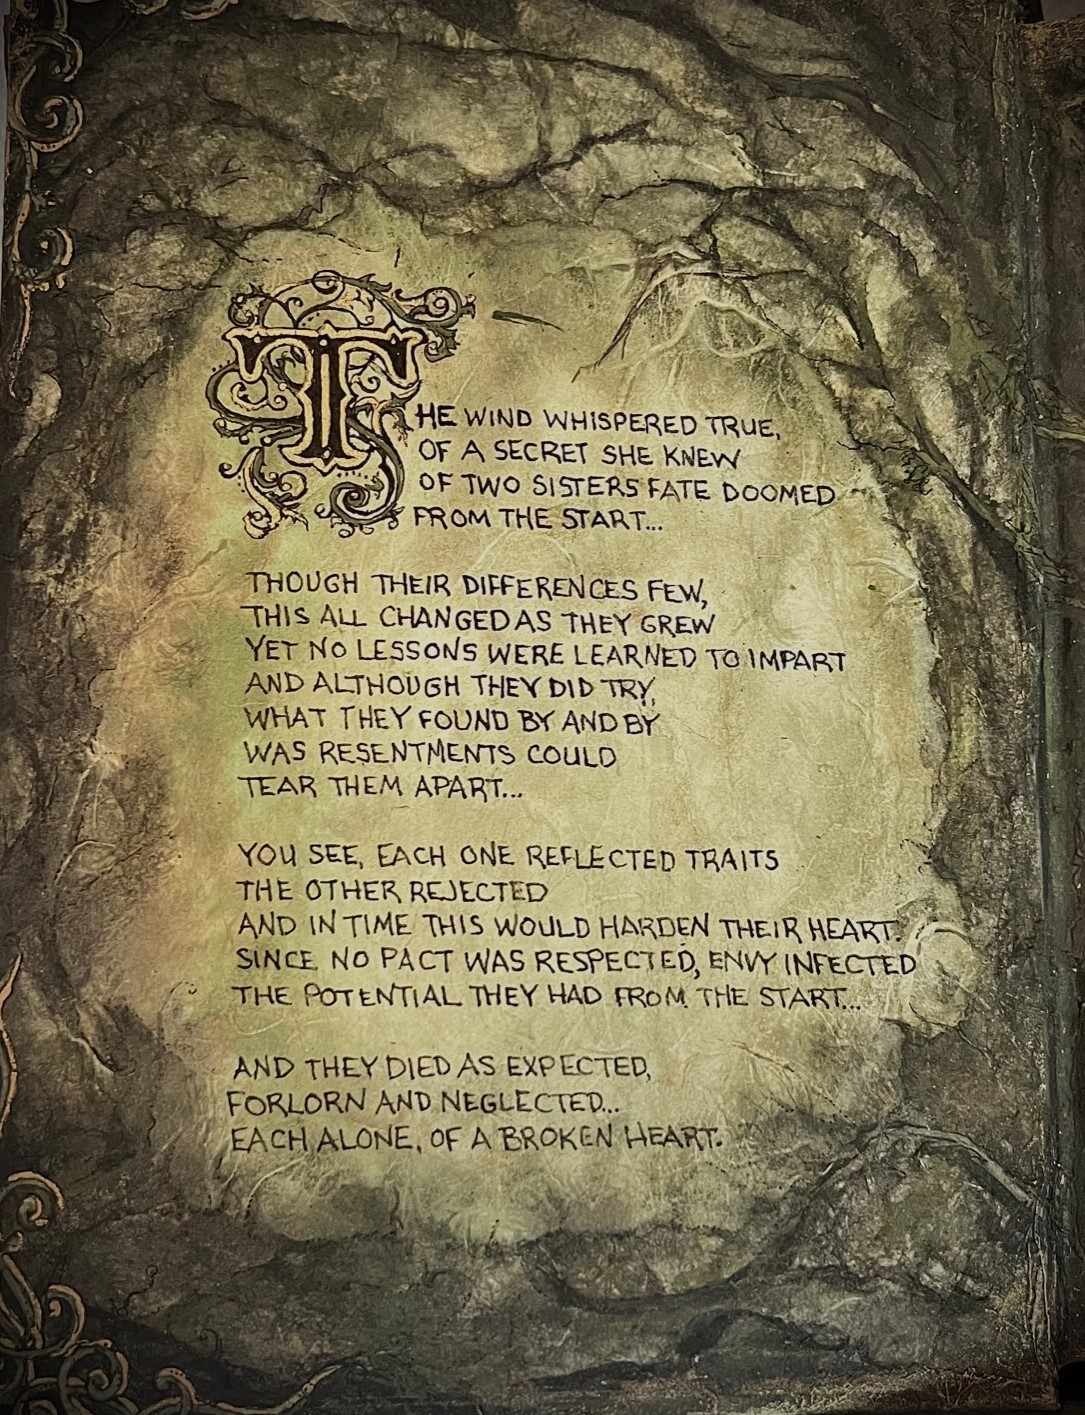 close-up A Cautionary Tale by Stefanie Vega paper mache book diorama gothic fairytale art hand-painted poem